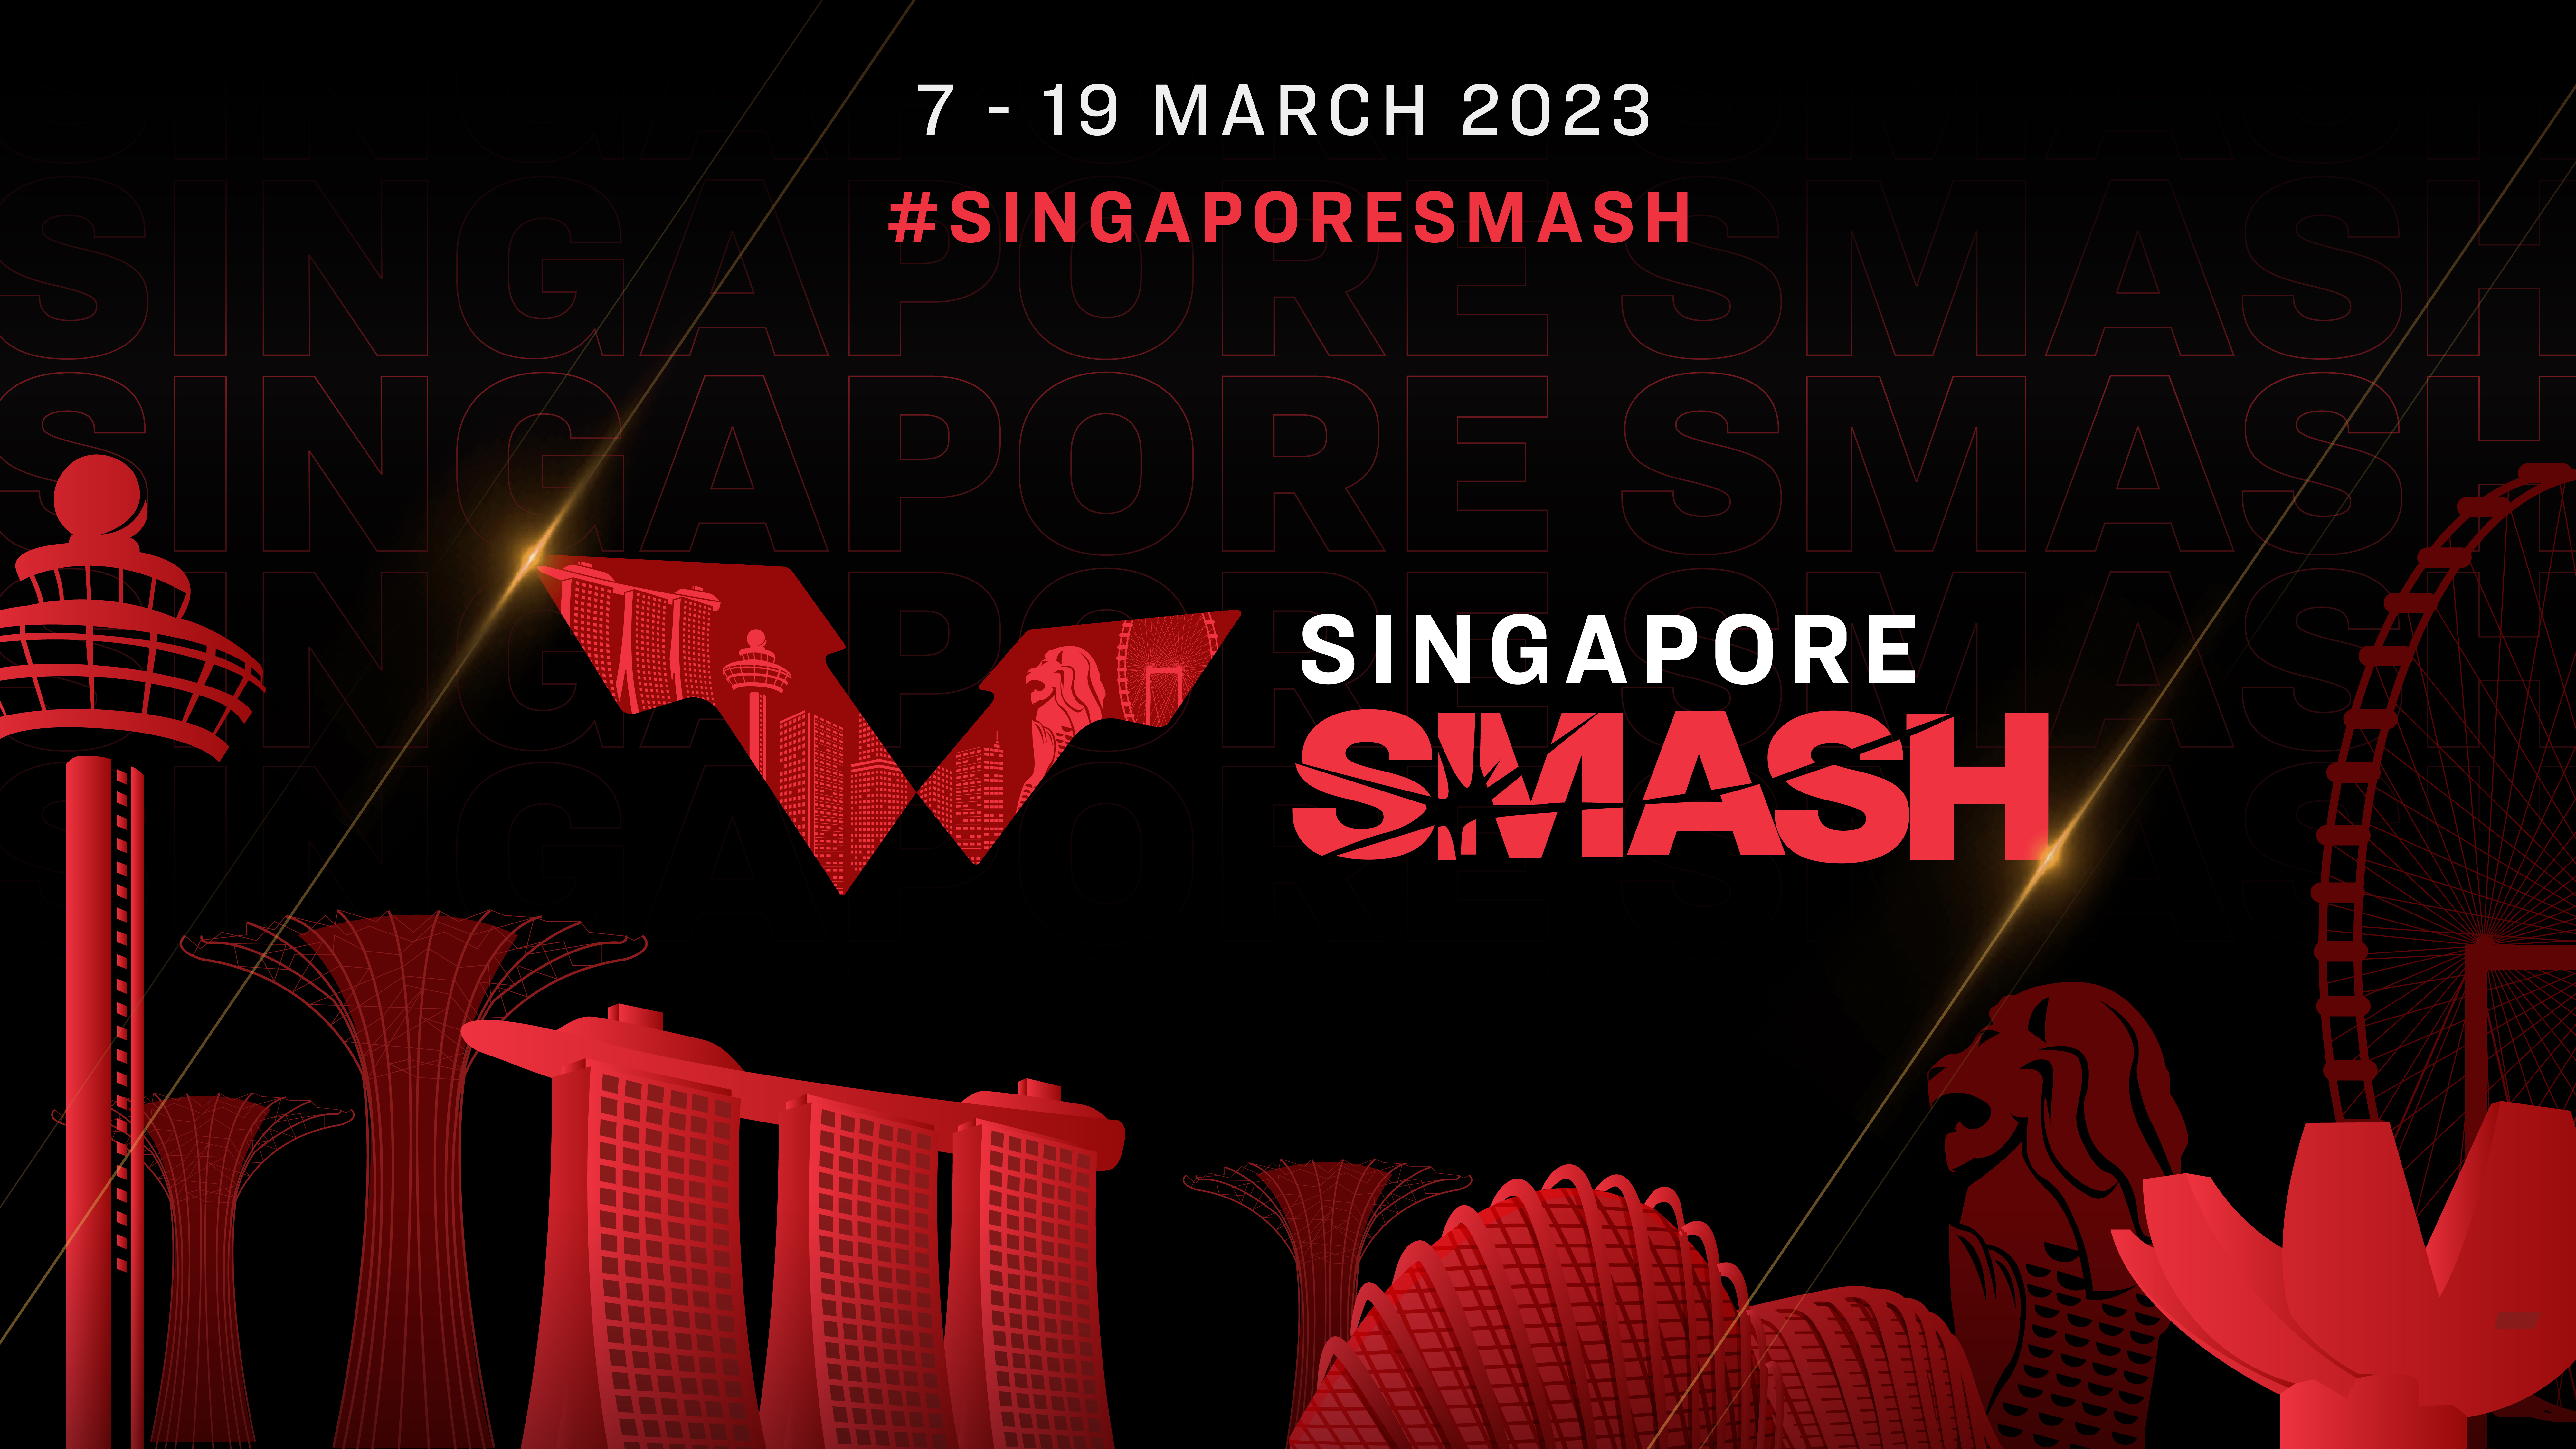 World's top paddlers to return & compete in Singapore Smash 2023!